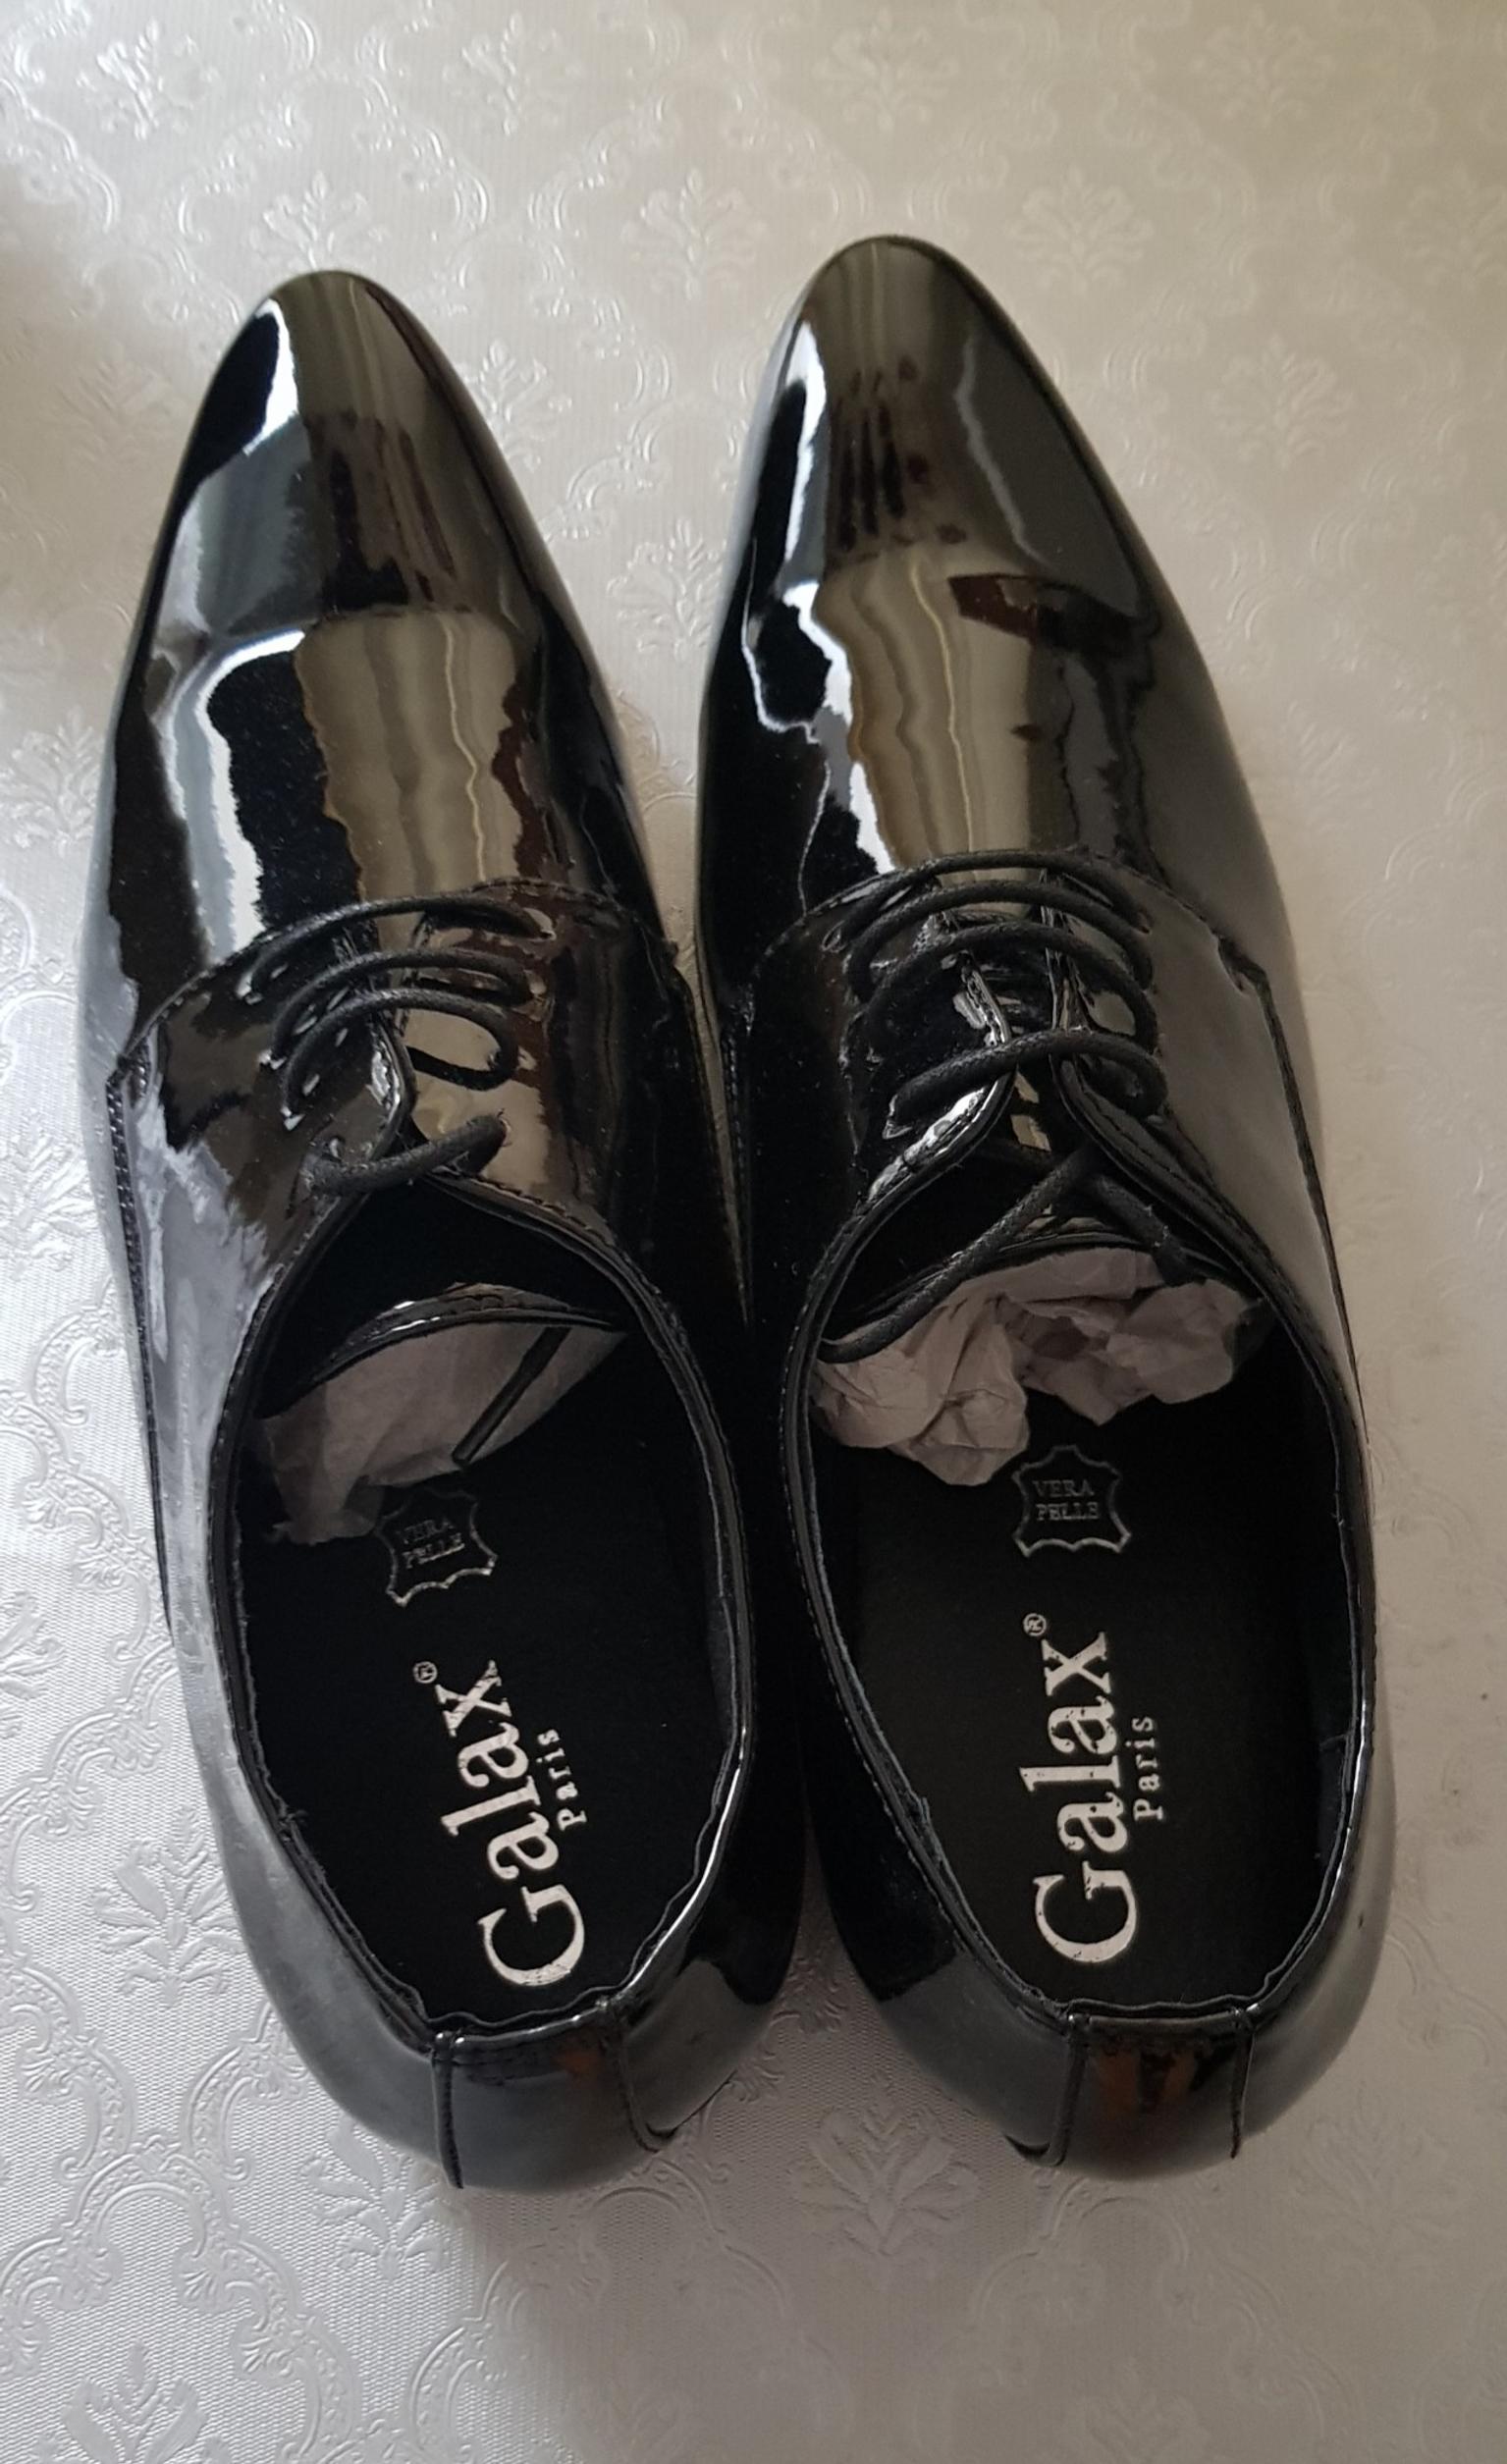 Mens Shiny Black Laced Shoes in E3 London for £15.00 for sale | Shpock